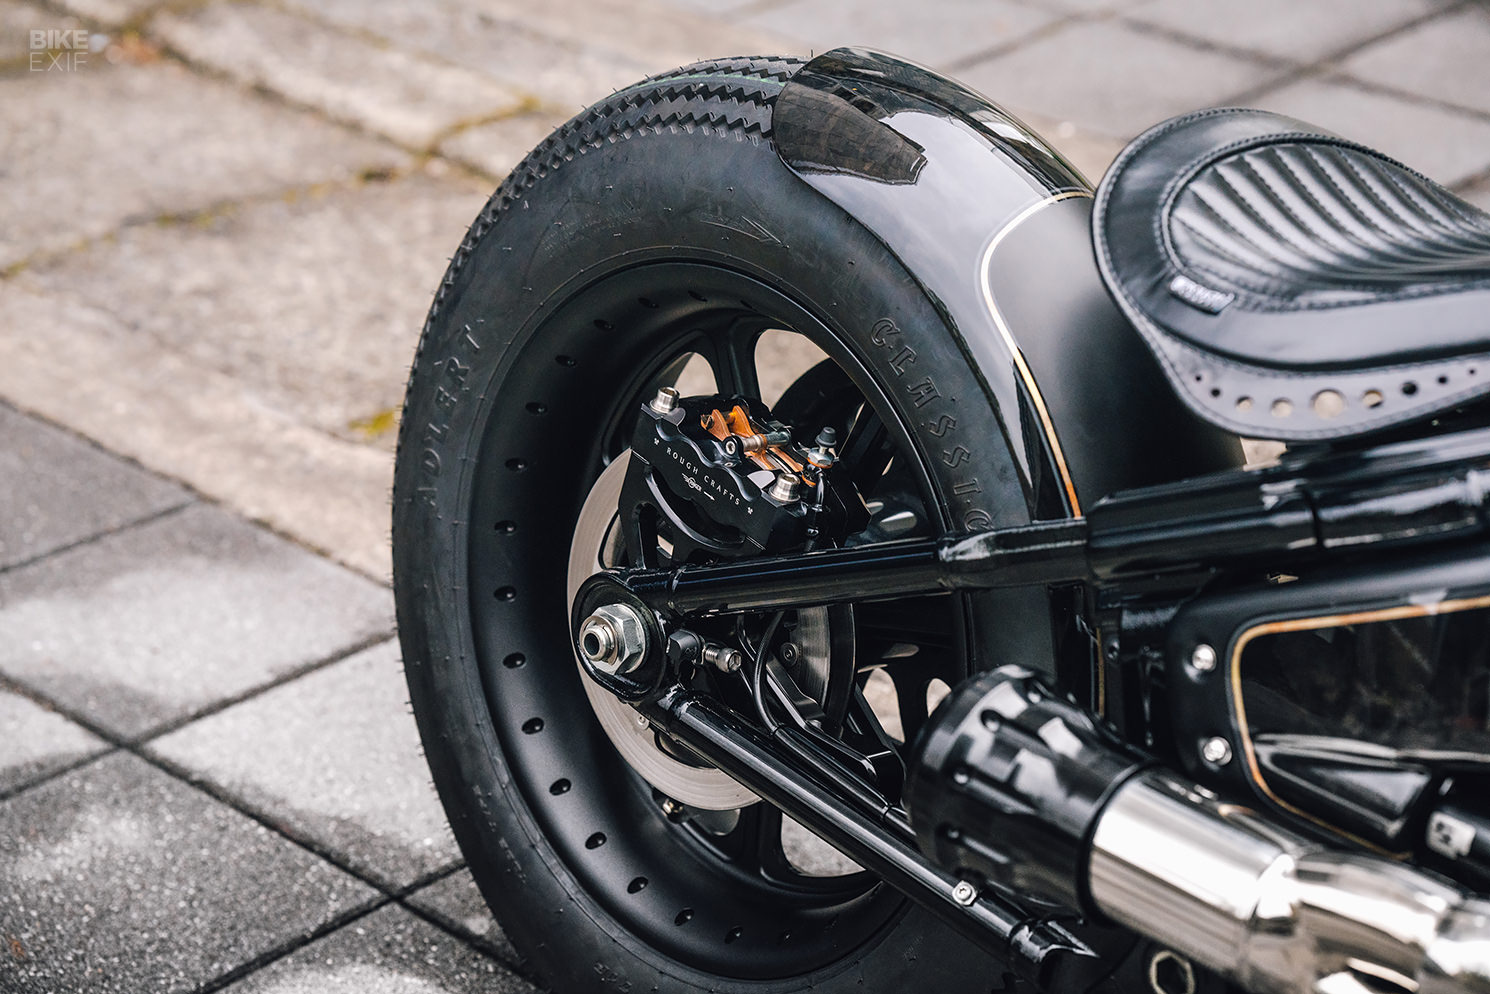 Back to basics: A Harley Fat Bob in Rough Crafts' signature style